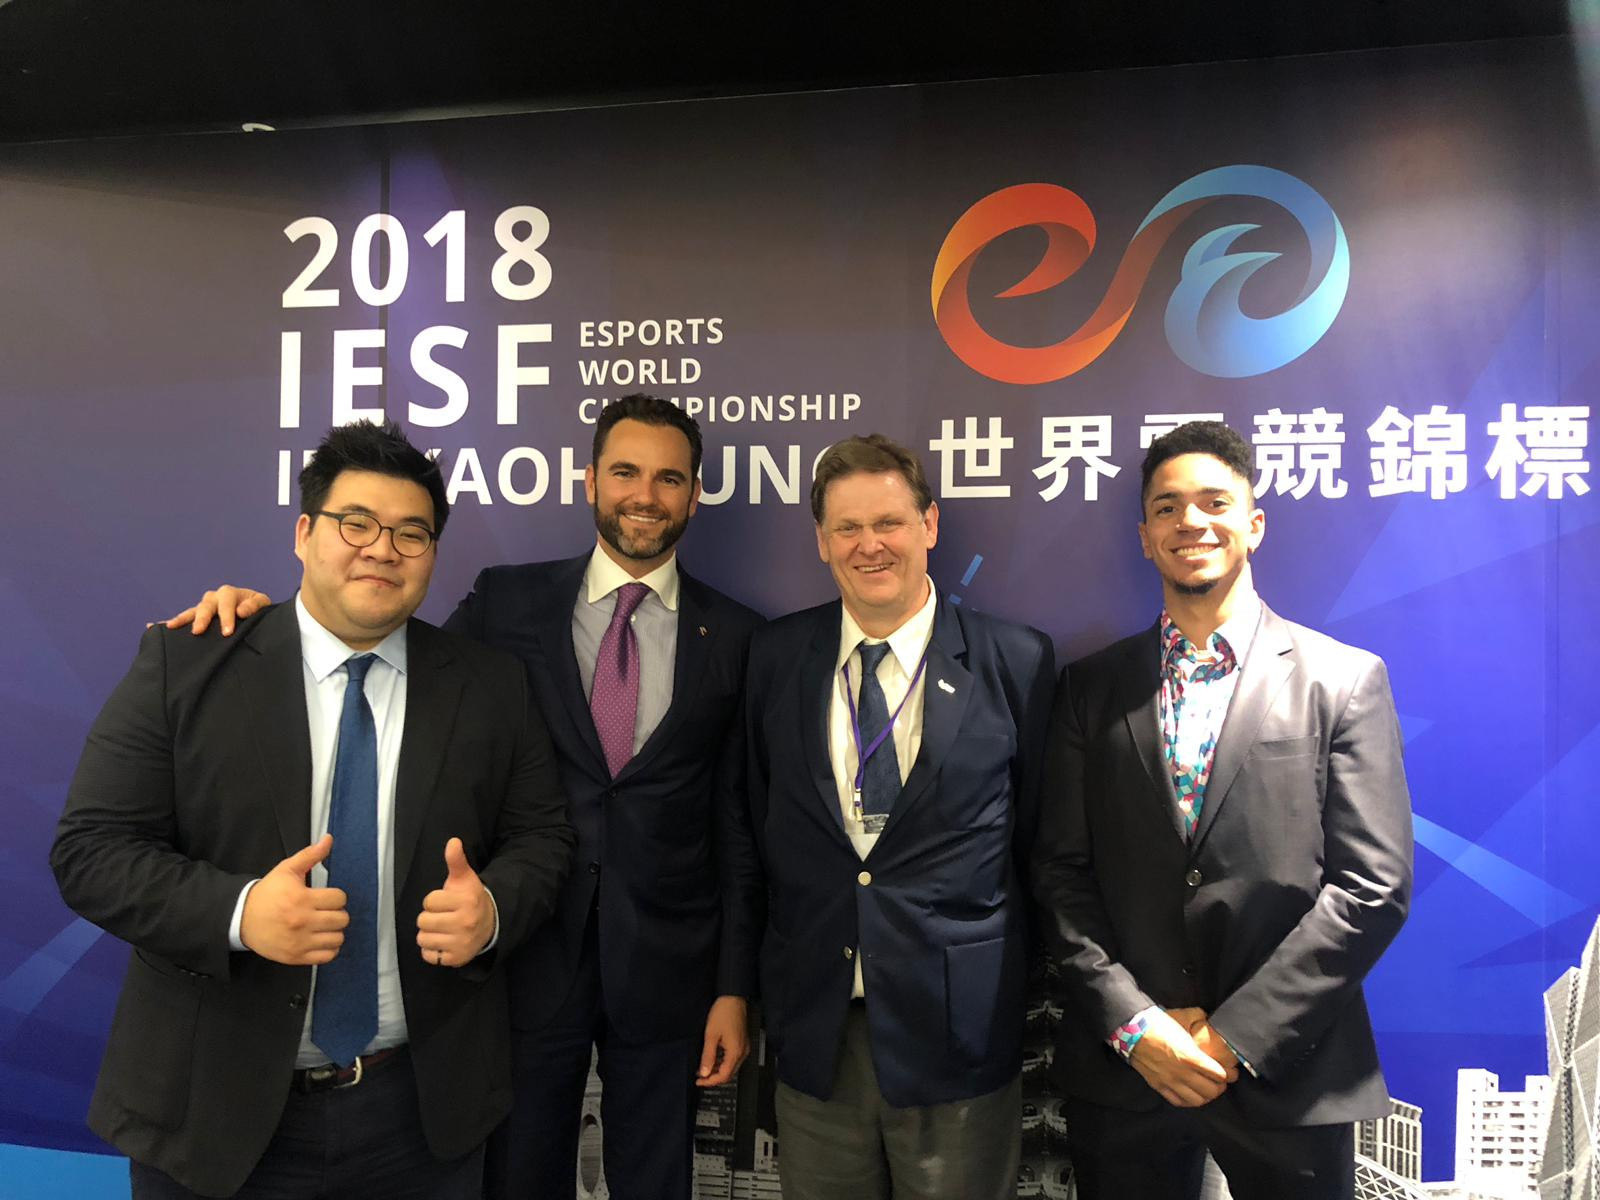 Vlad Marinescu, President of the United States eSports Federation, second left, wants to represent all of America's 60 million gaming fraternity after they were elected members of the International eSports Federation ©USeF